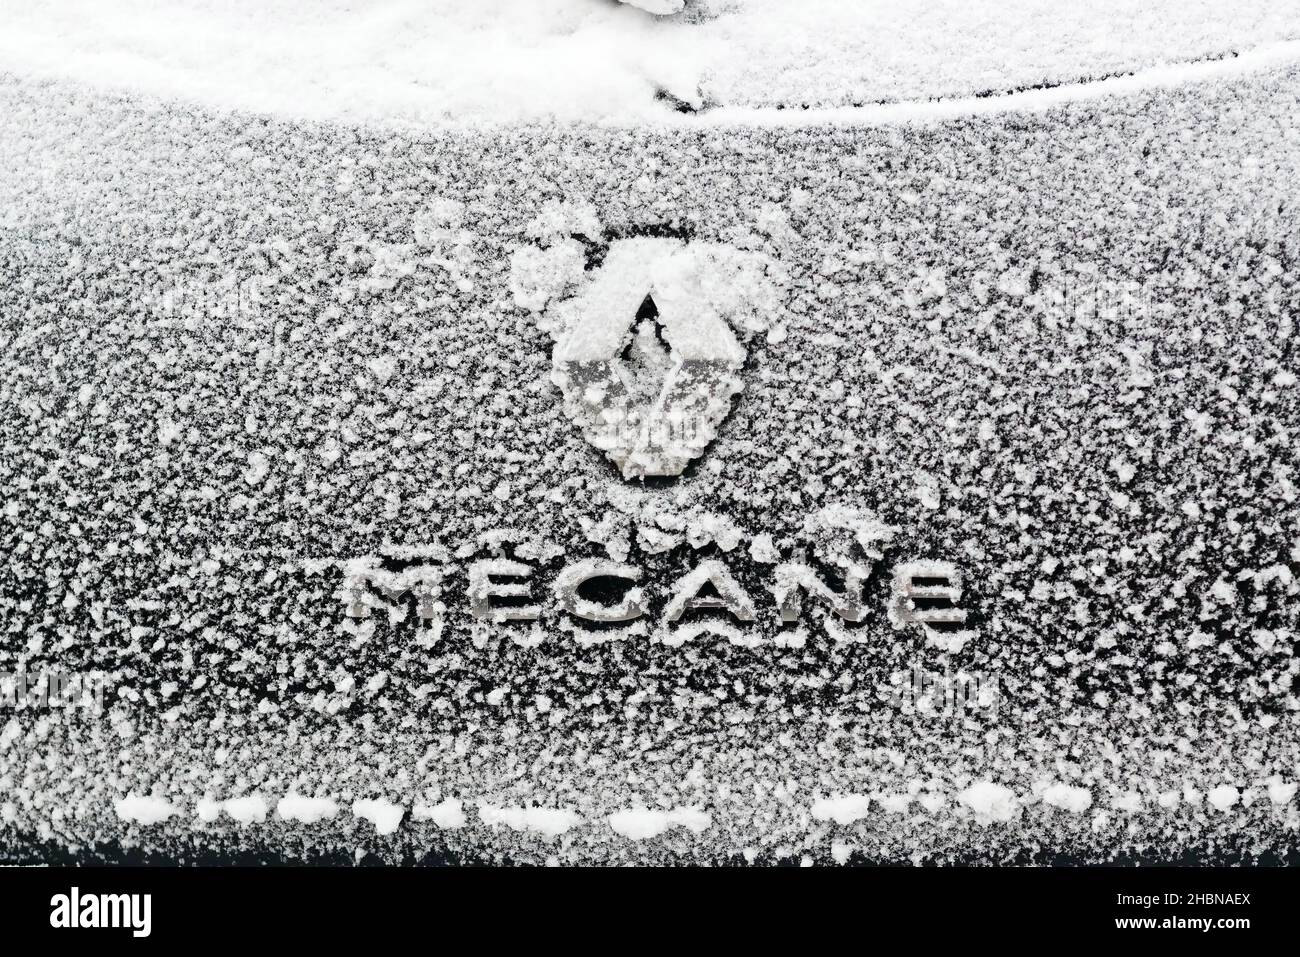 Moscow, Russia - December 13, 2021: Snowy Hood of a brand car Renault Megane. Renault Group - French Automobile Corporation, which is part of the Alli Stock Photo